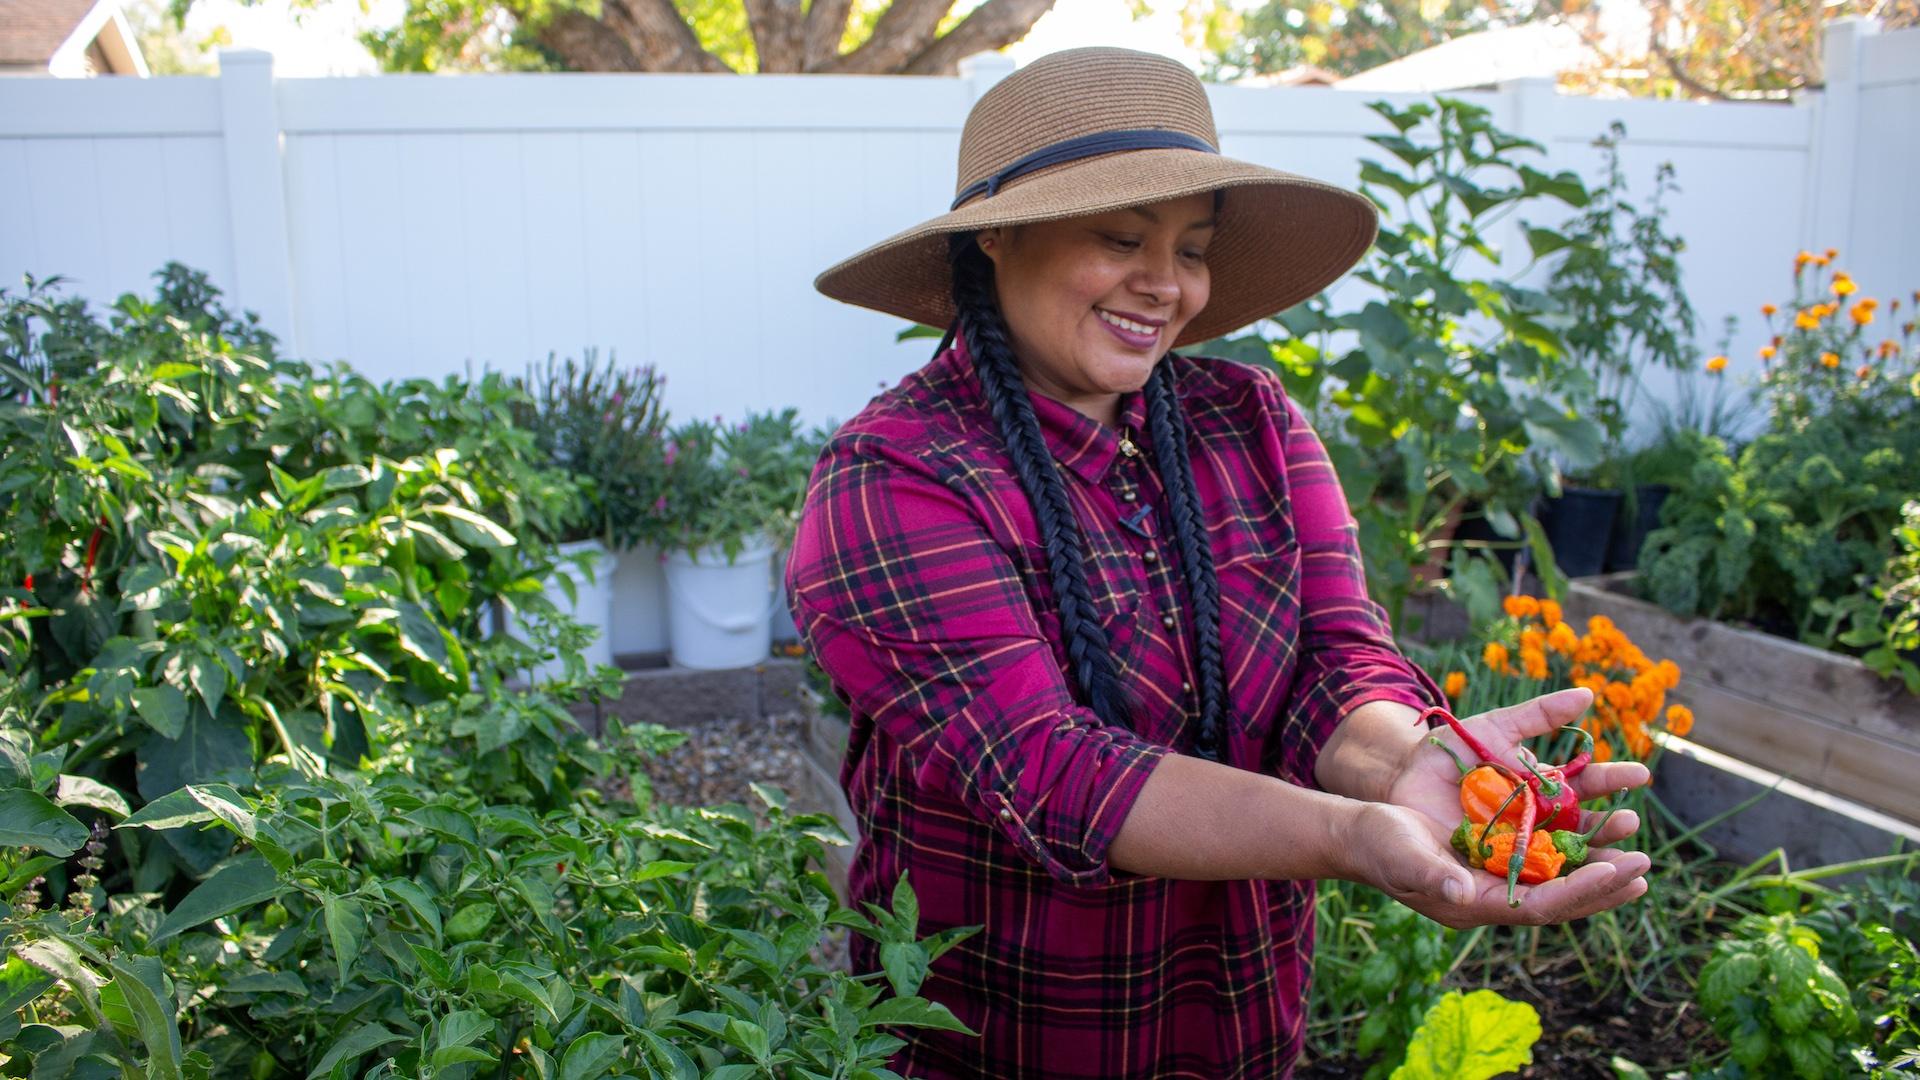 woman standing in garden with hat, braids, and plaid red shirt holding a handful of peppers